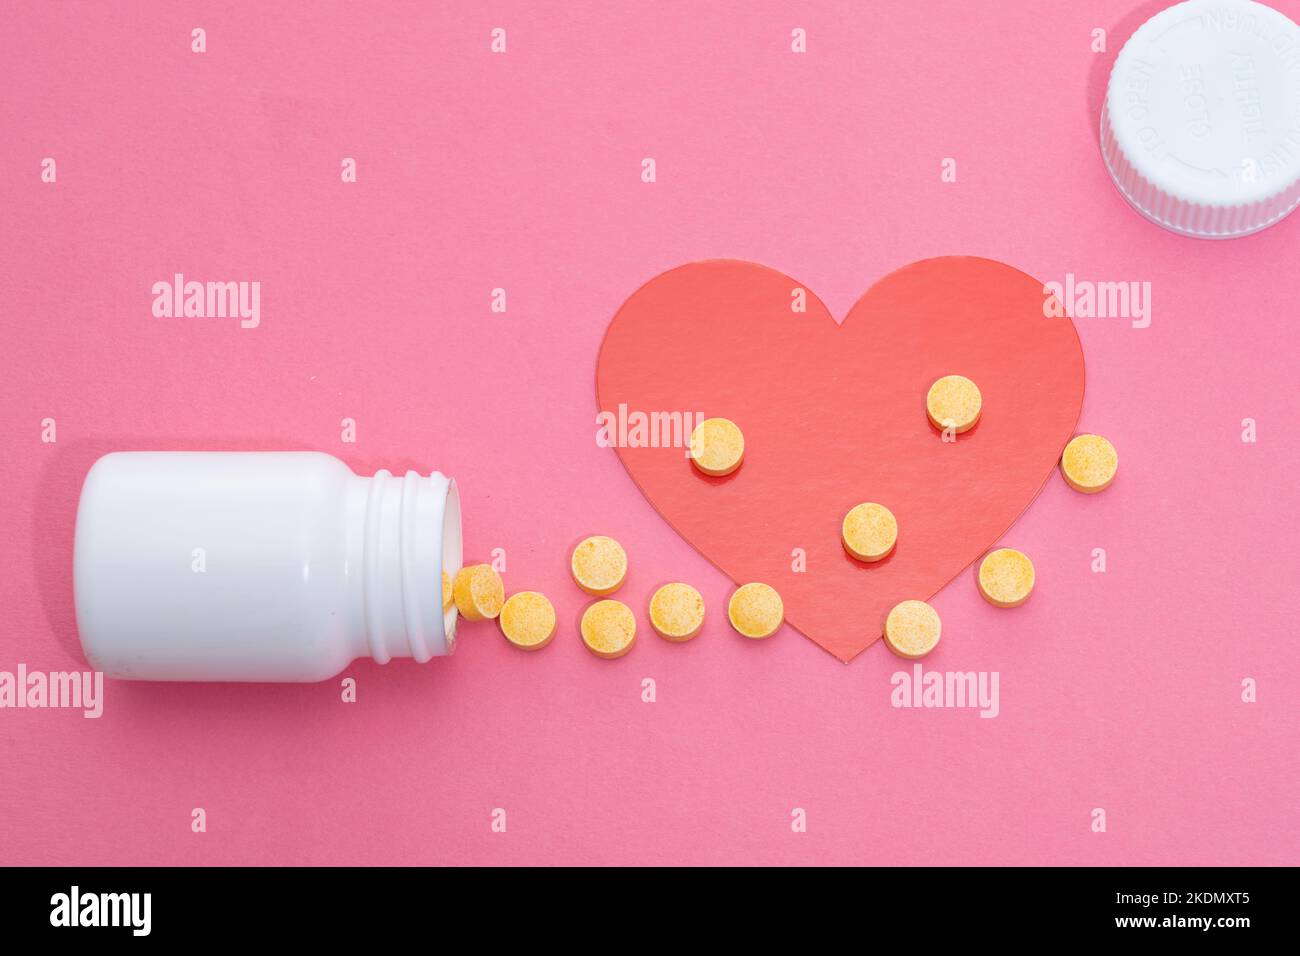 Pills spilled from a bottle to help your heart health Stock Photo